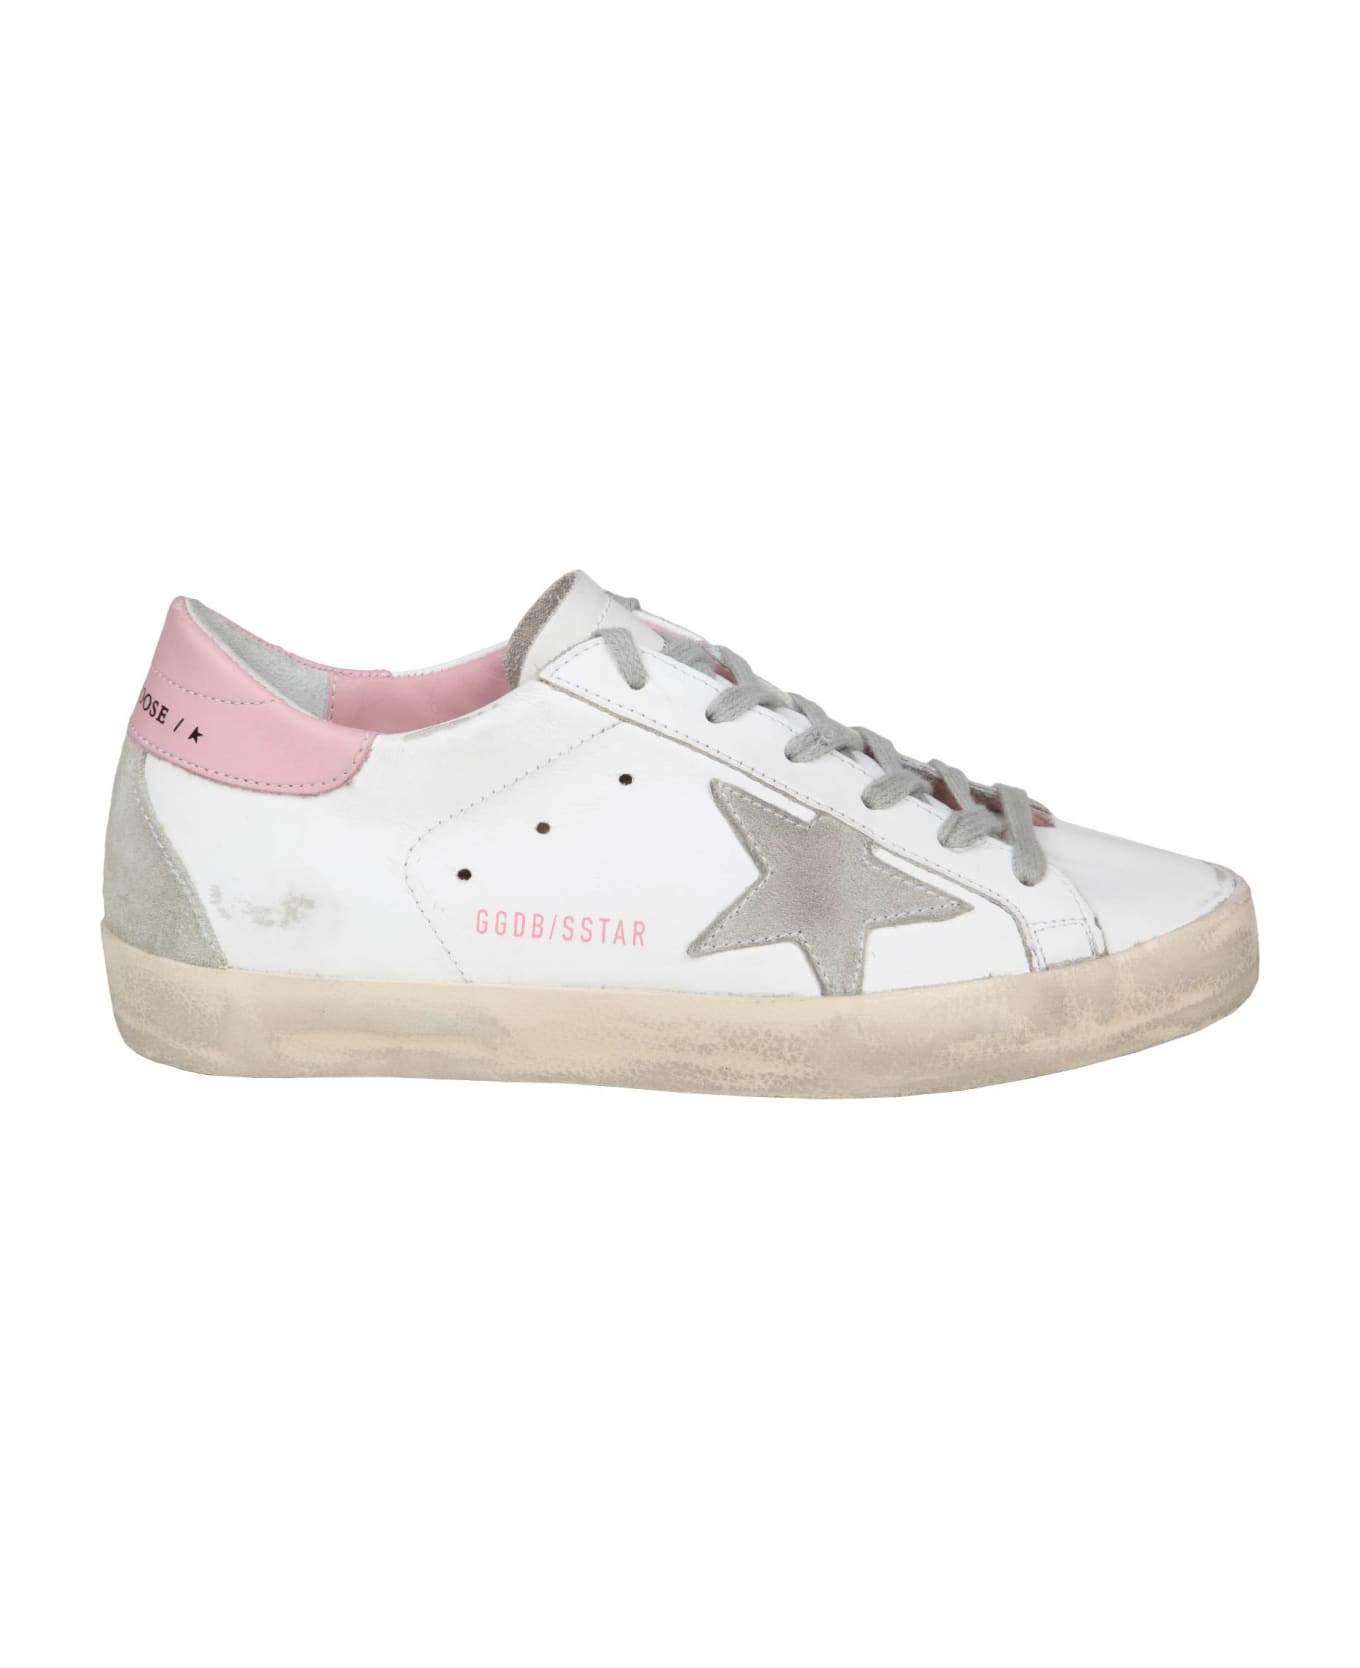 Golden Goose Super Star Sneakers In White And Pink Leather - White/Ice/light pink